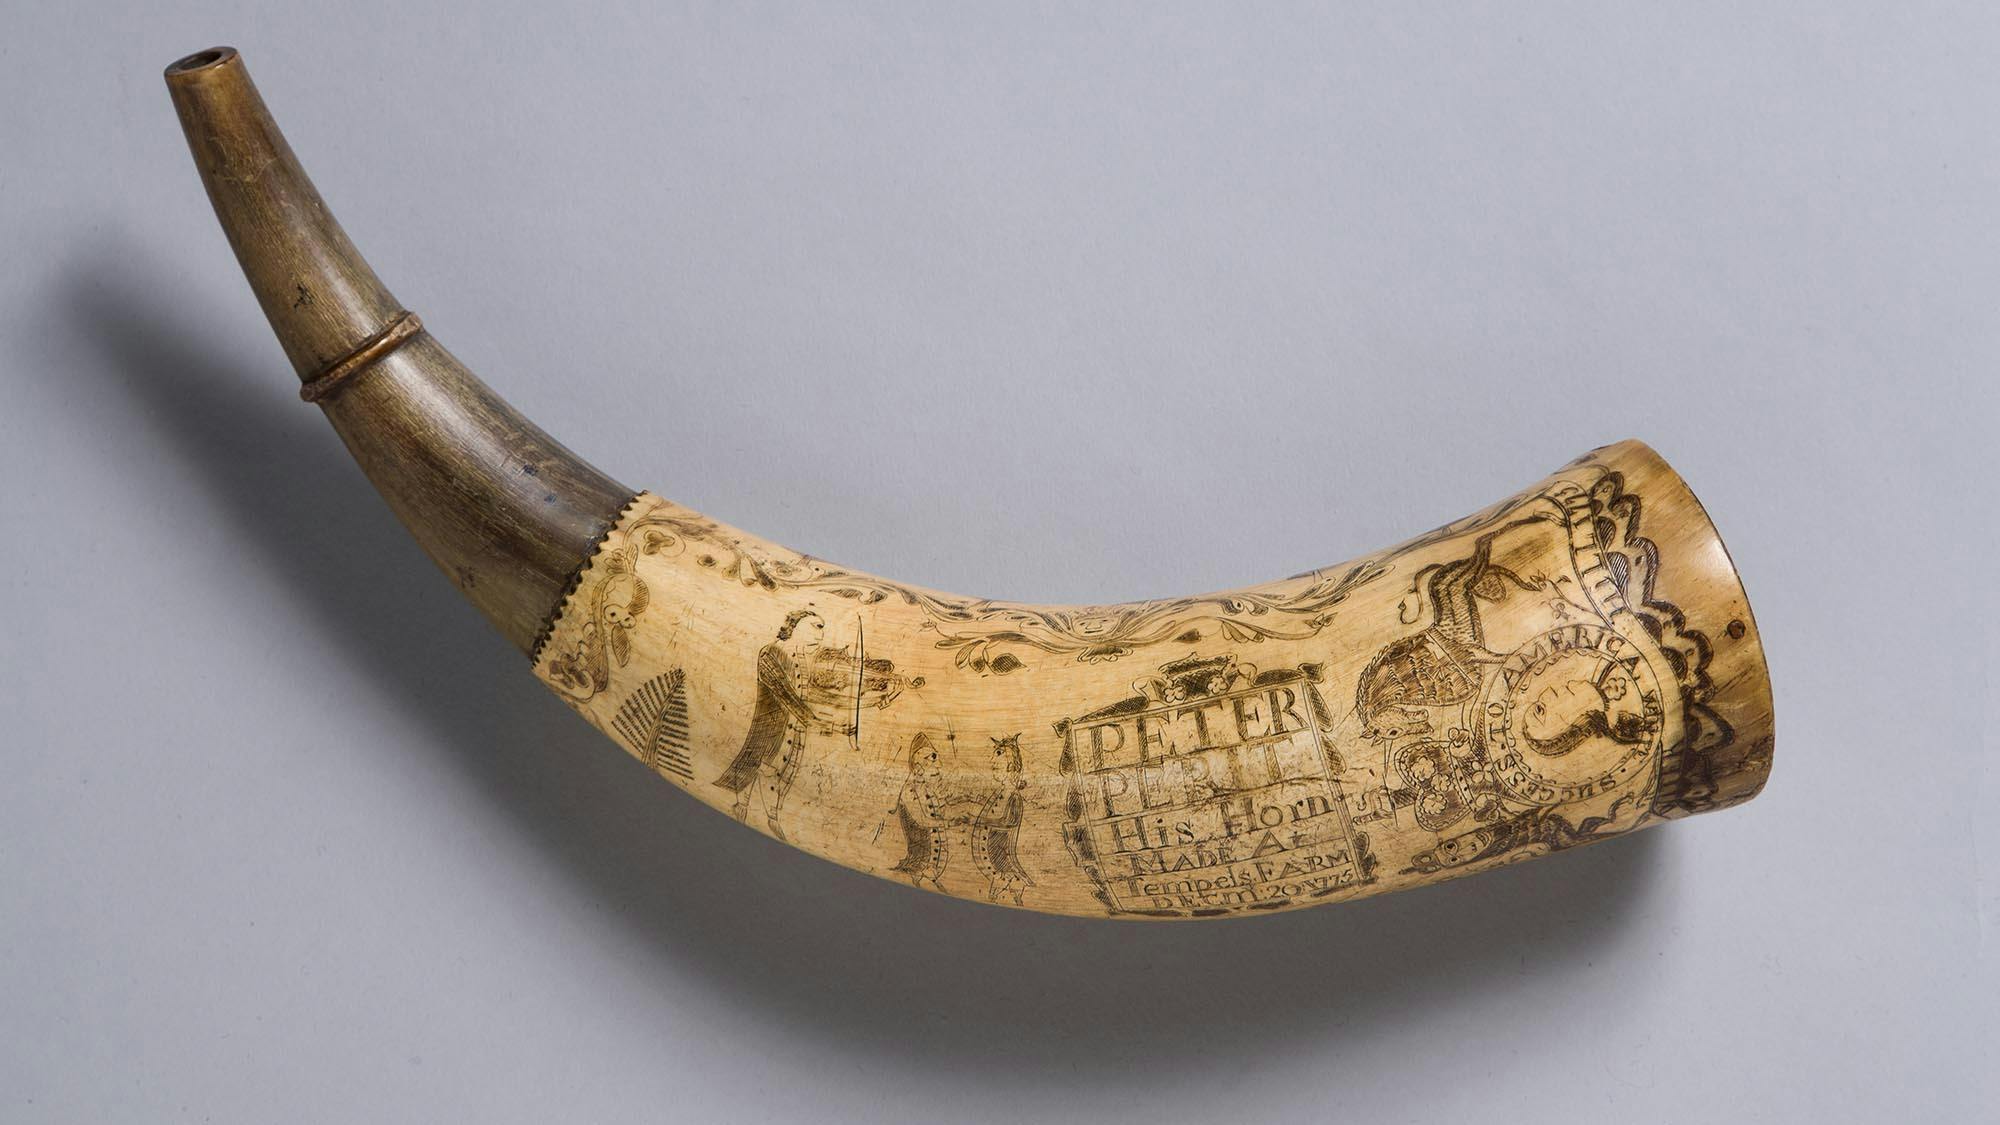 Peter Perit's Powder Horn - Museum of the American Revolution